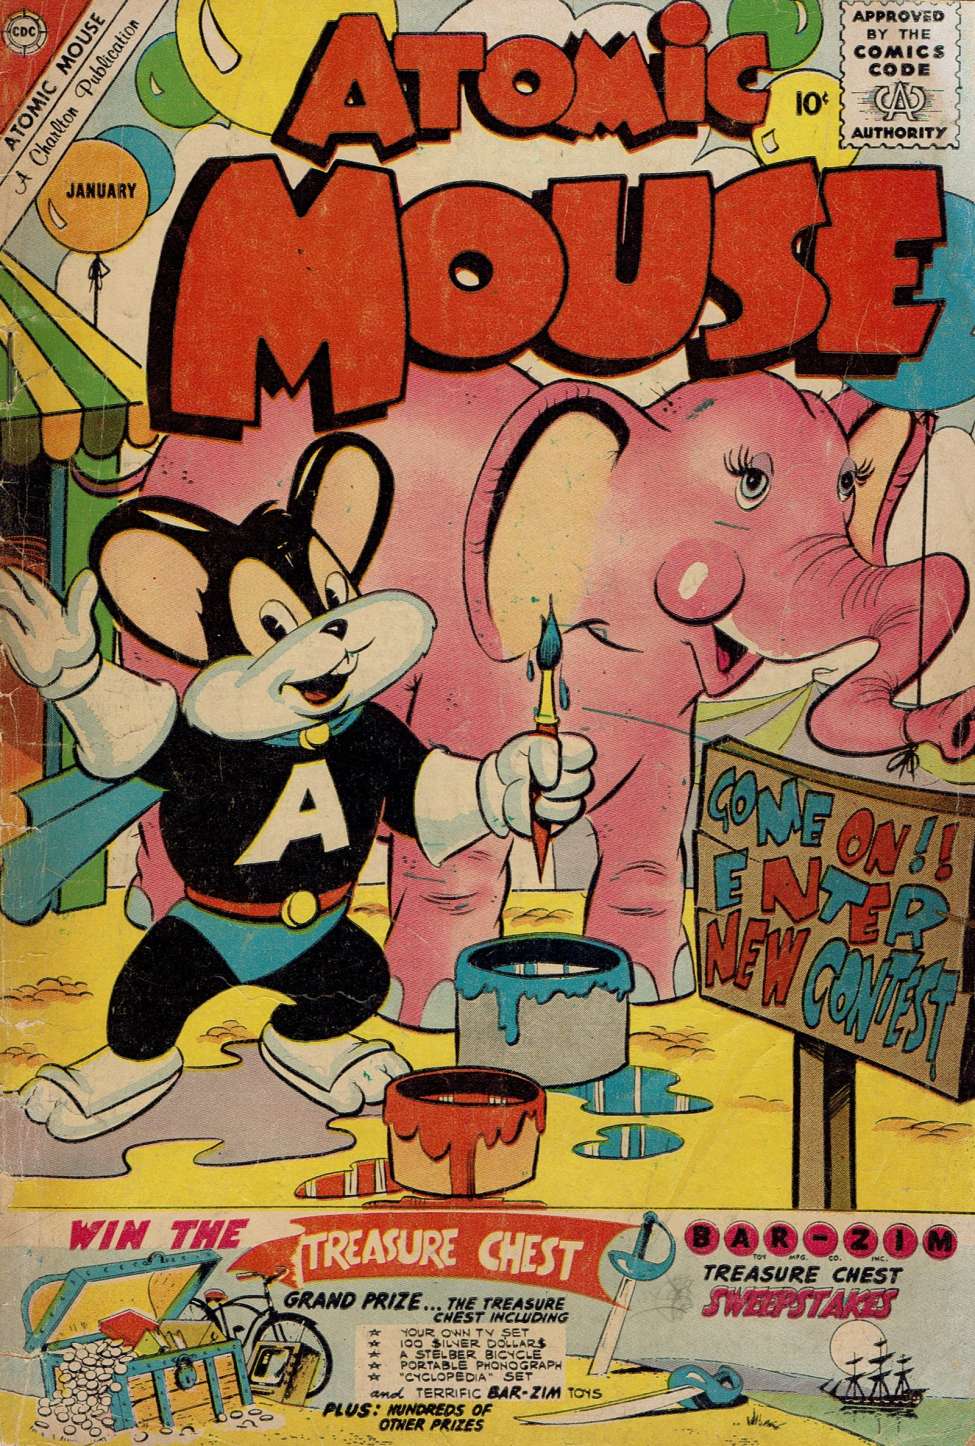 Book Cover For Atomic Mouse 40